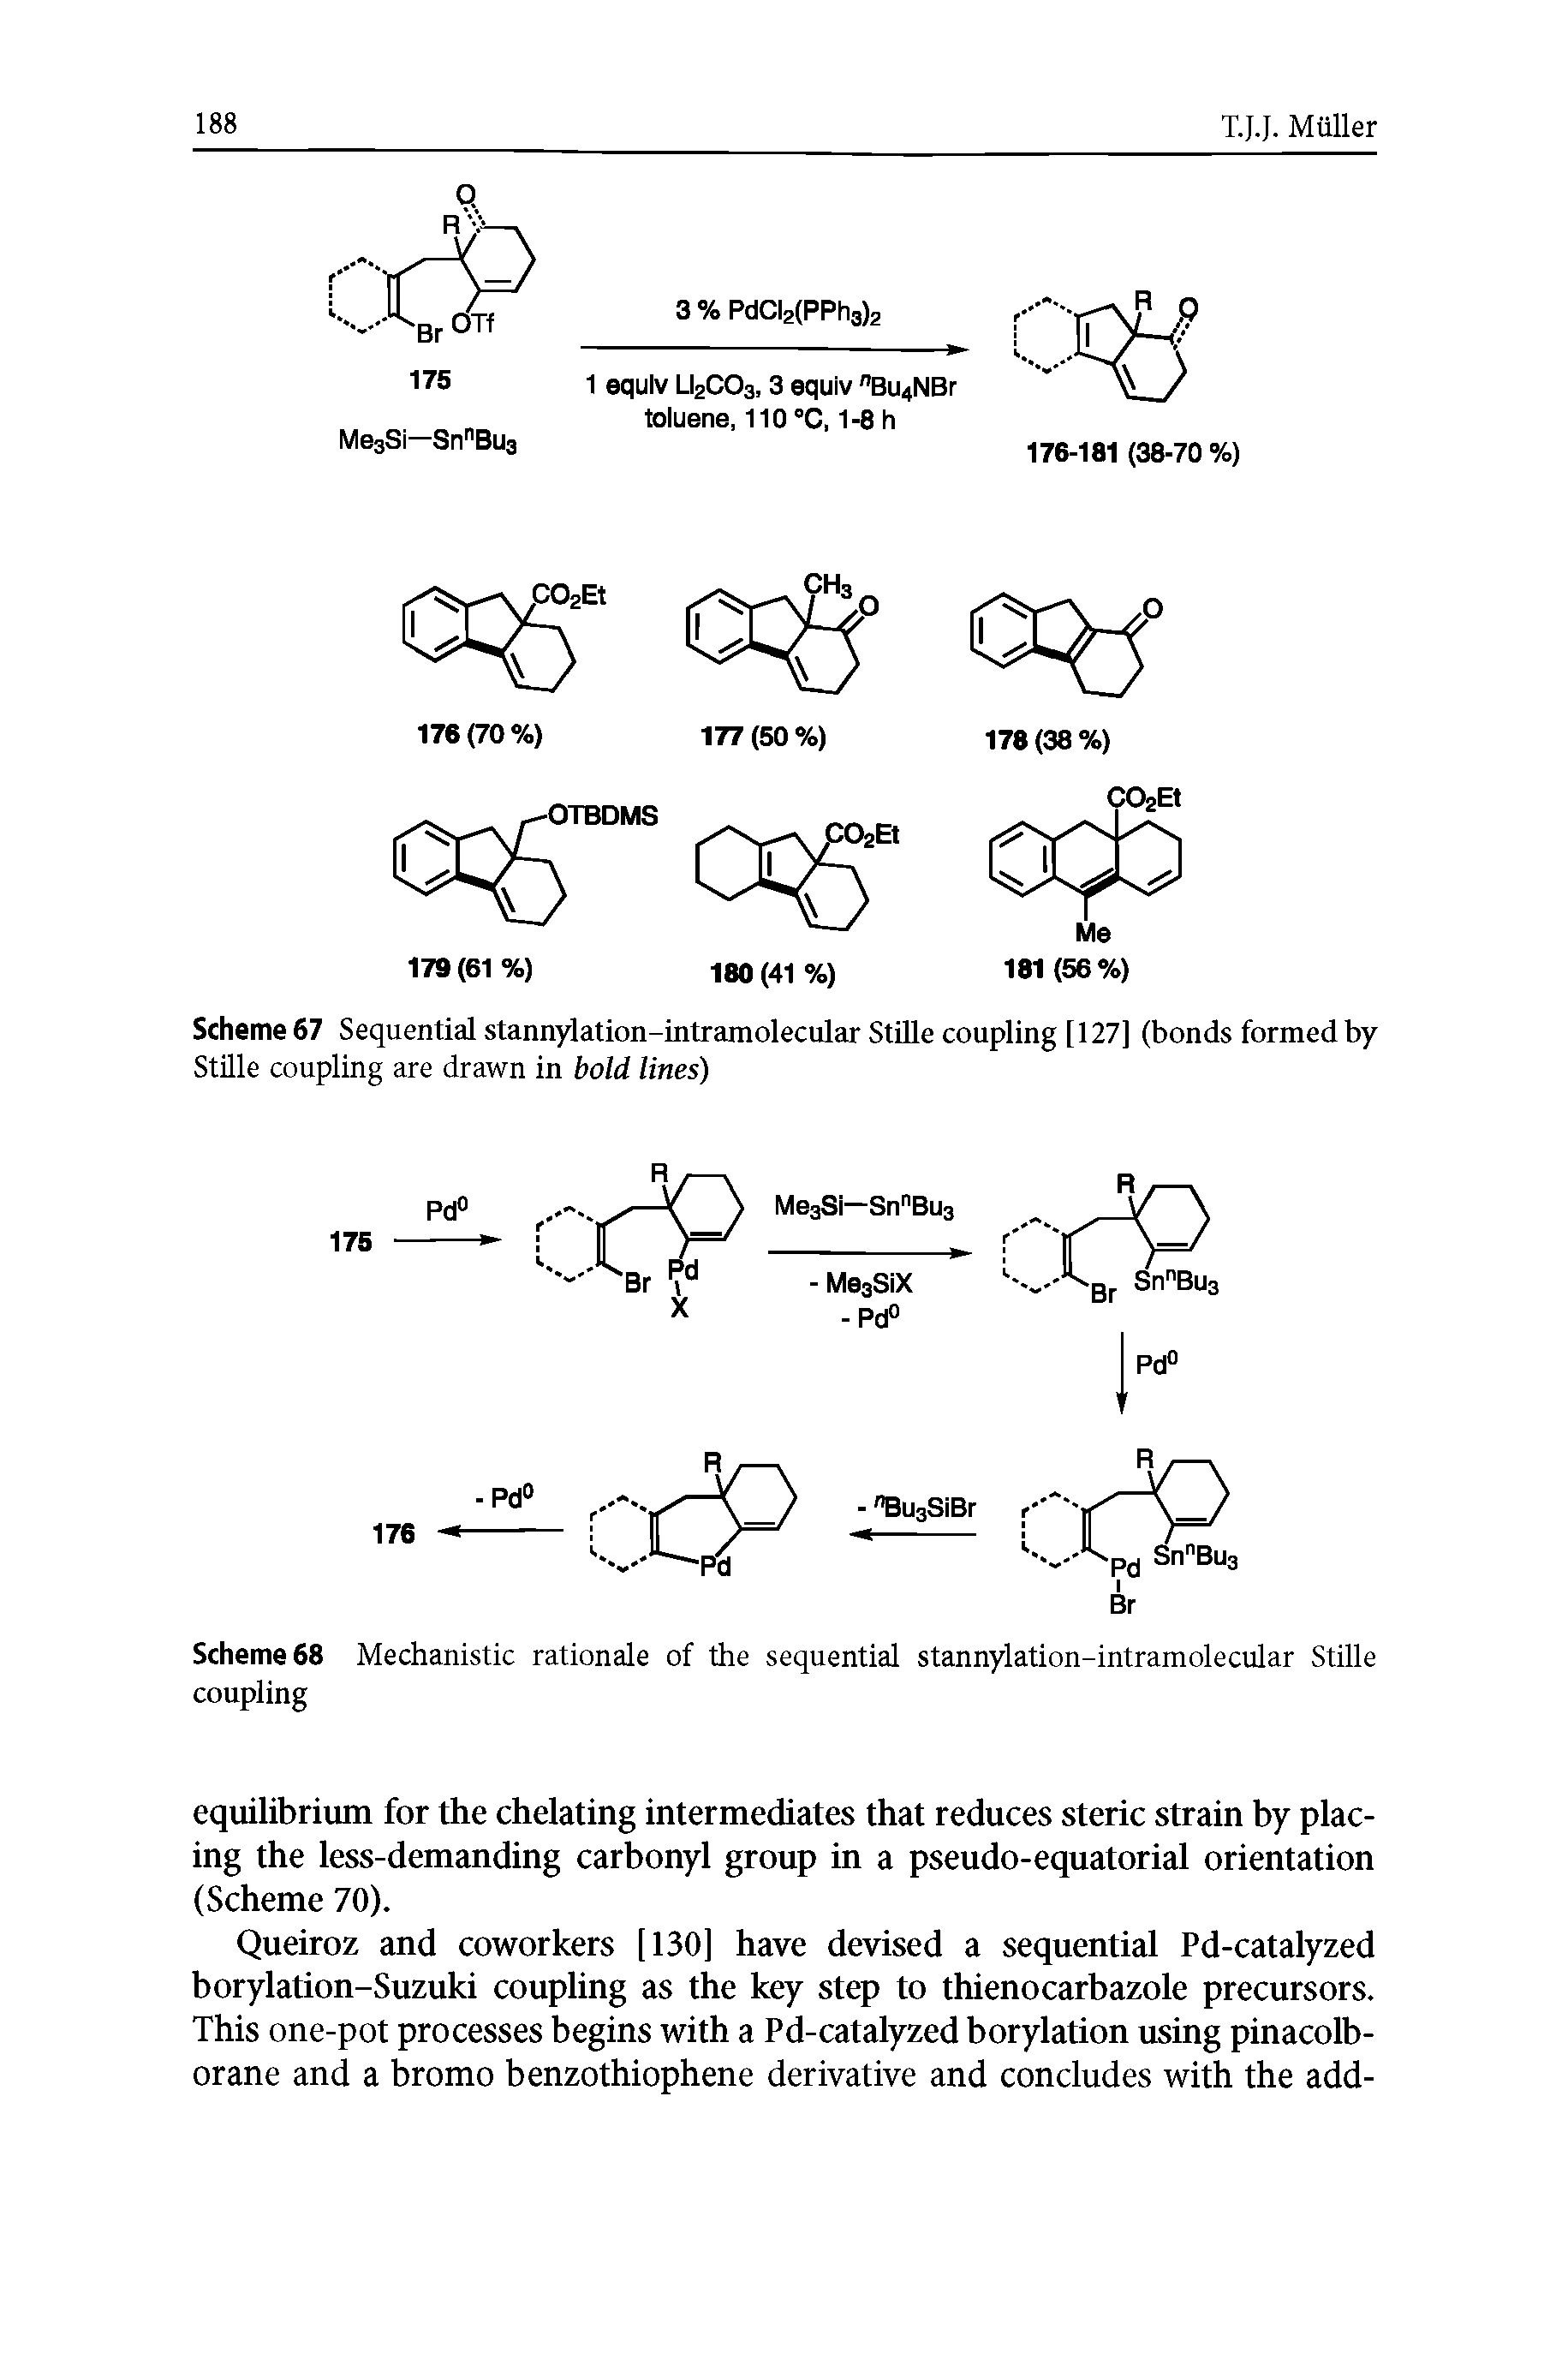 Scheme 67 Sequential stannylation-intramolecular Stille coupling [127] (bonds formed by Stille coupling are drawn in bold lines)...